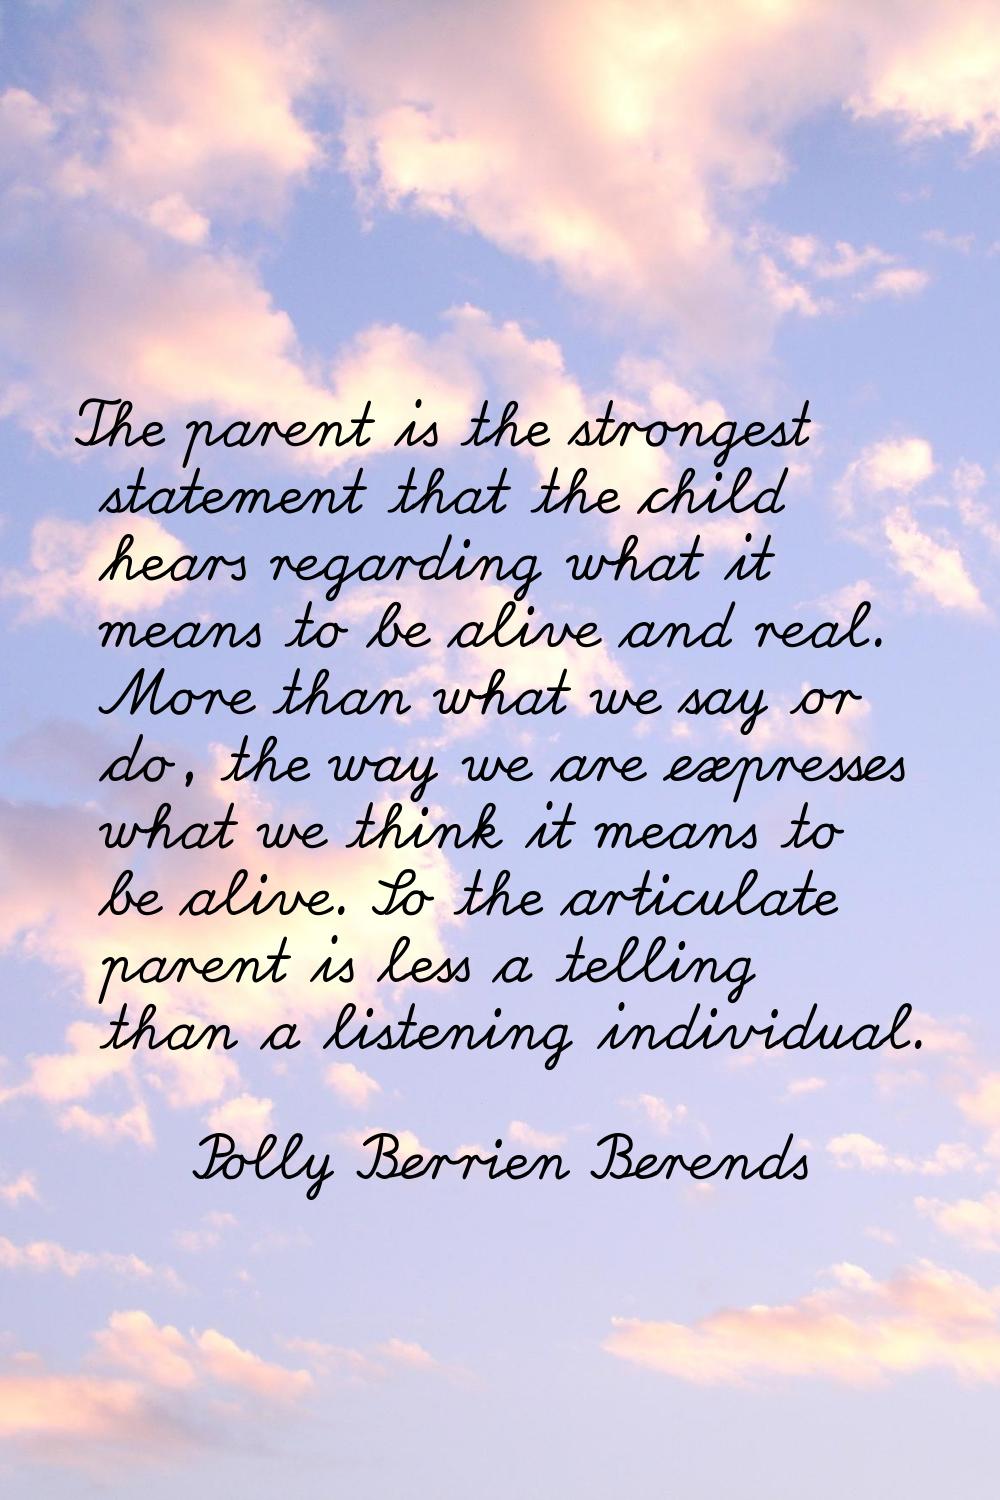 The parent is the strongest statement that the child hears regarding what it means to be alive and 